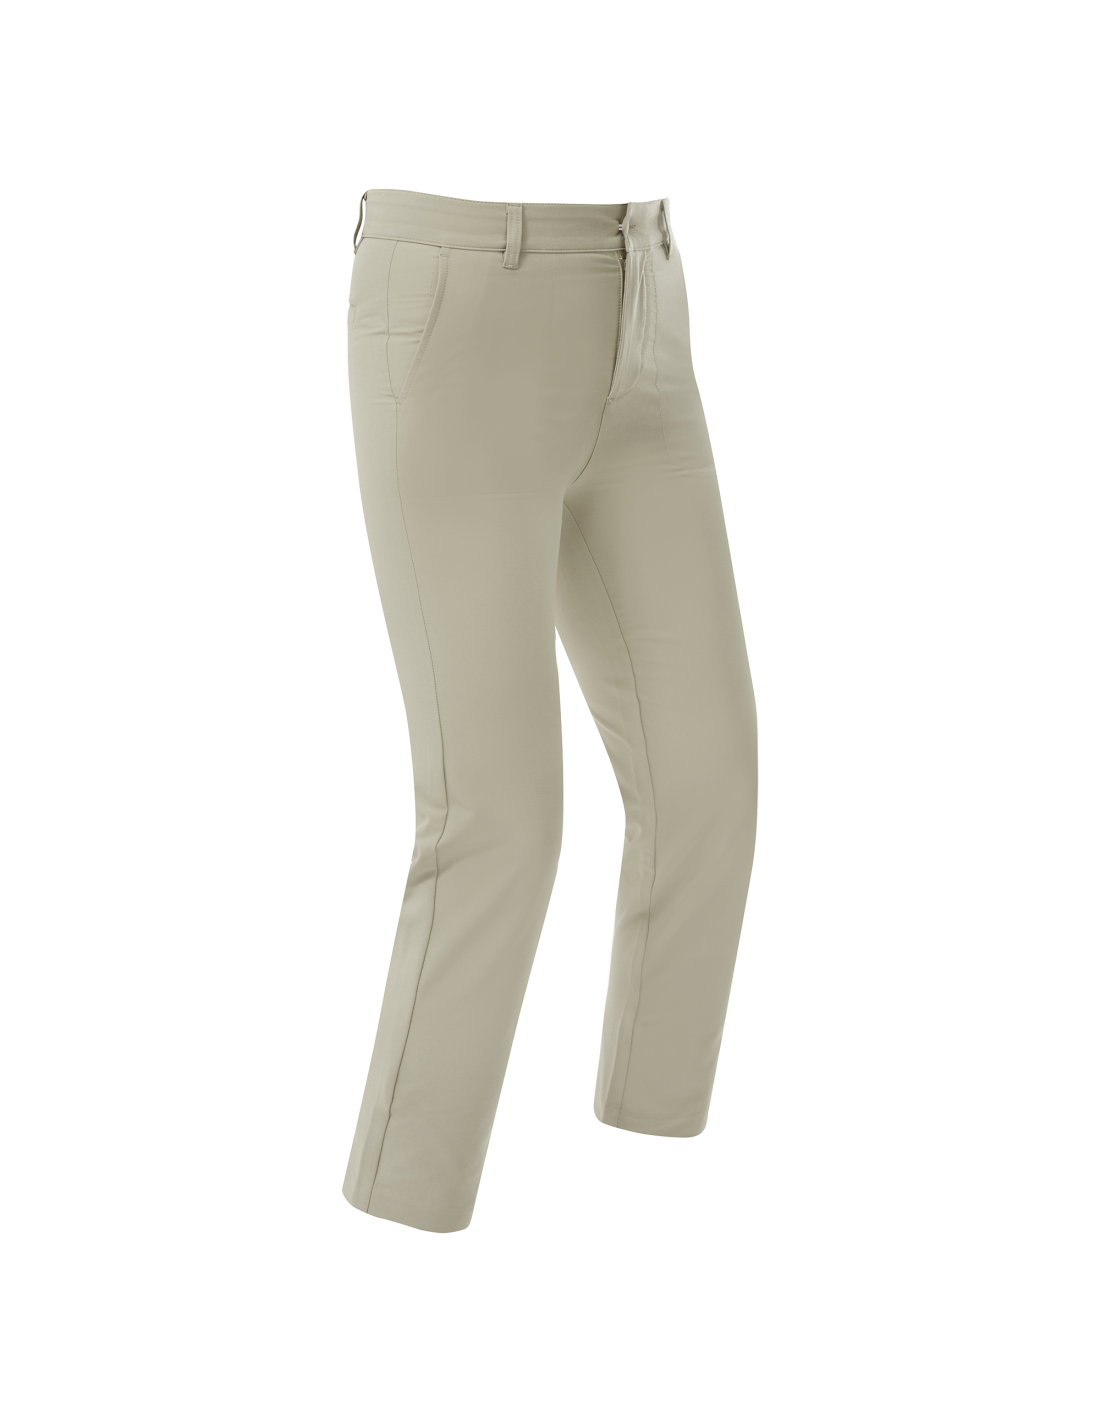 FootJoy Ladies Stretch Crop Golf Trousers from american golf